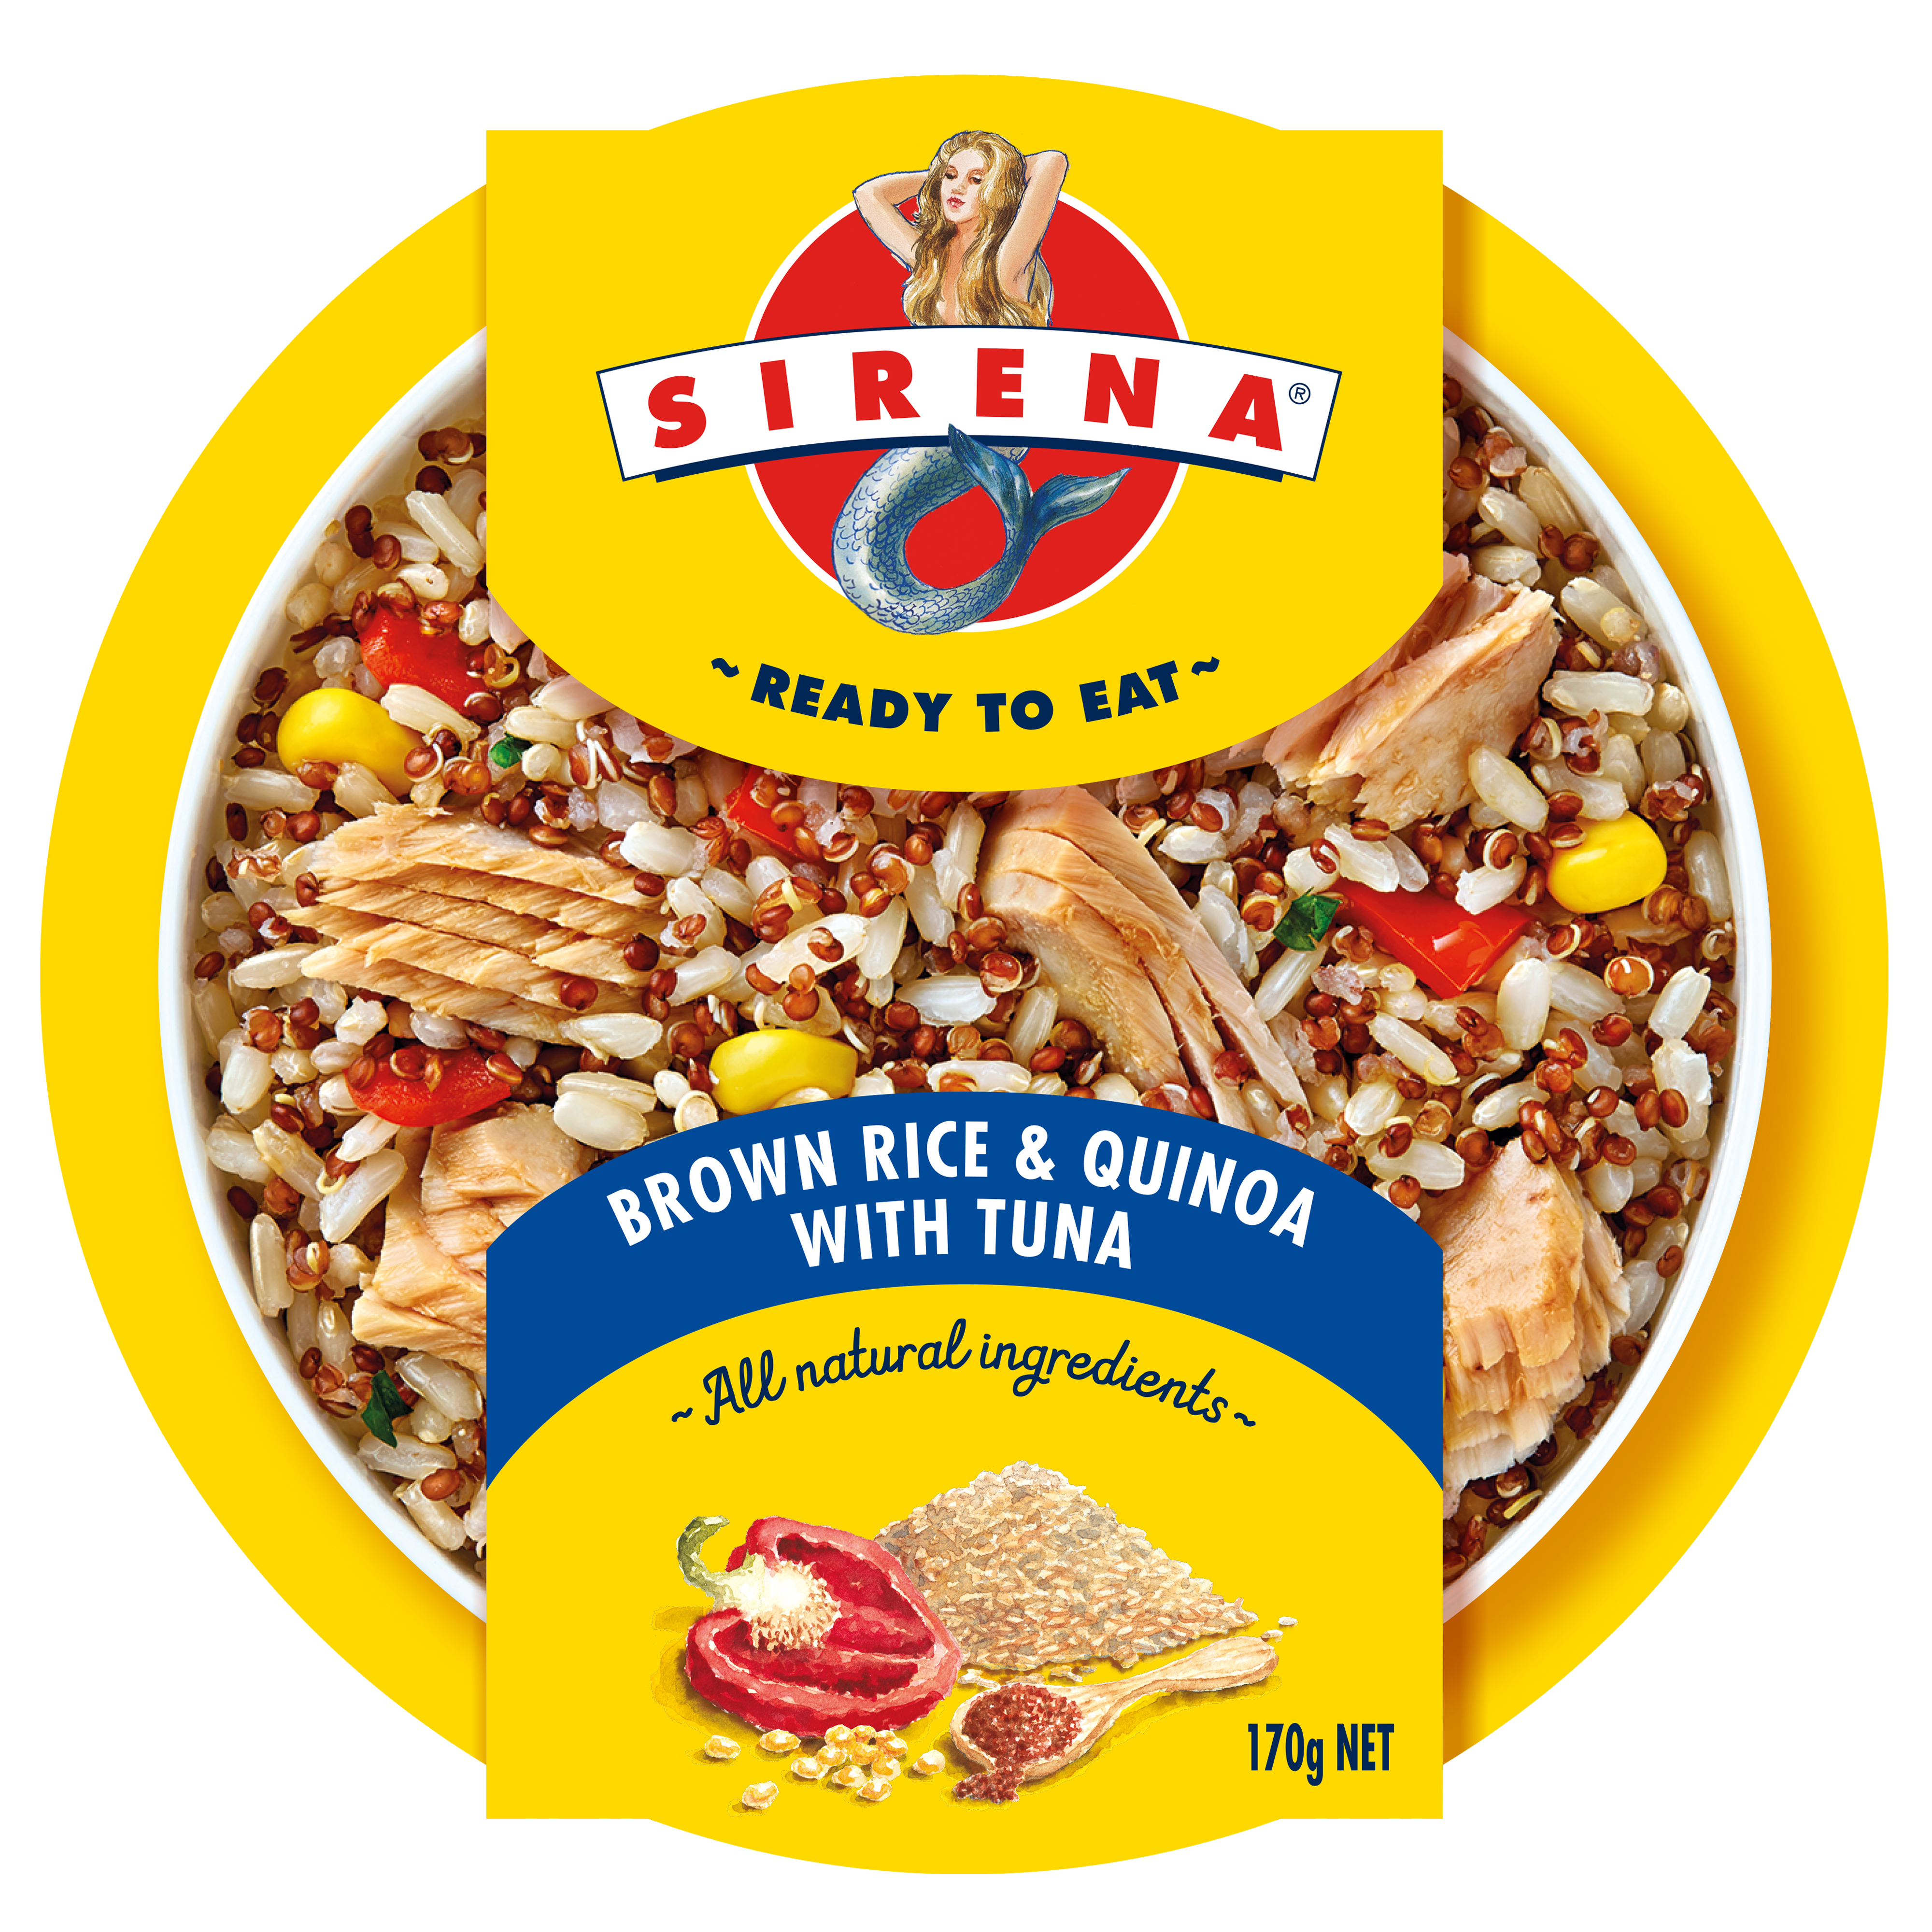 Sirena Ready to Eat Brown Rice and Quinoa with Tuna